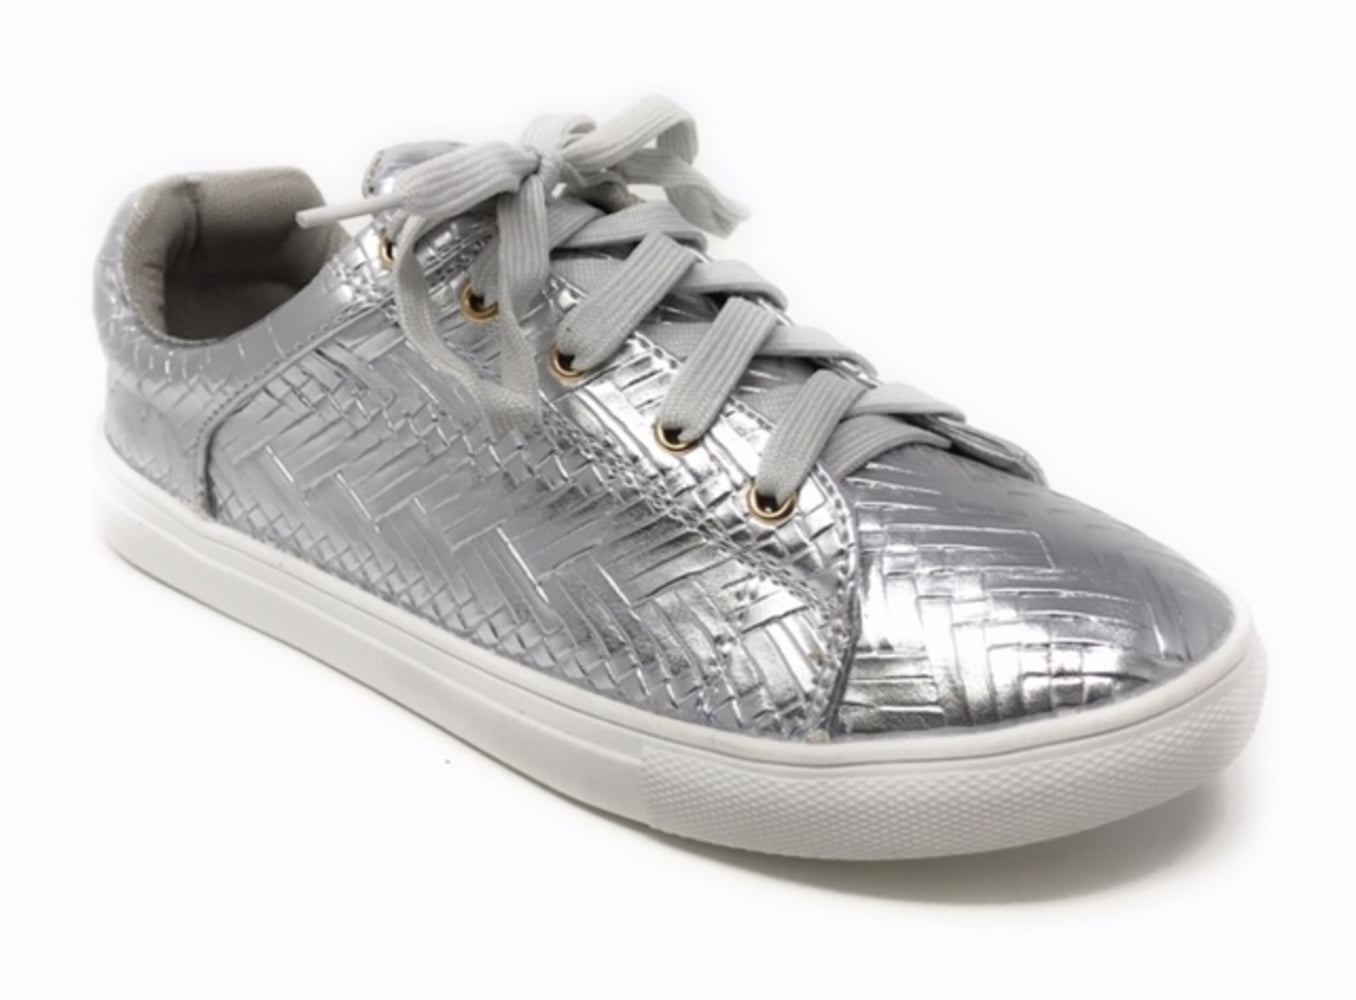 Buy Blinder Full White Womens Sneakers lace-up Shoes at